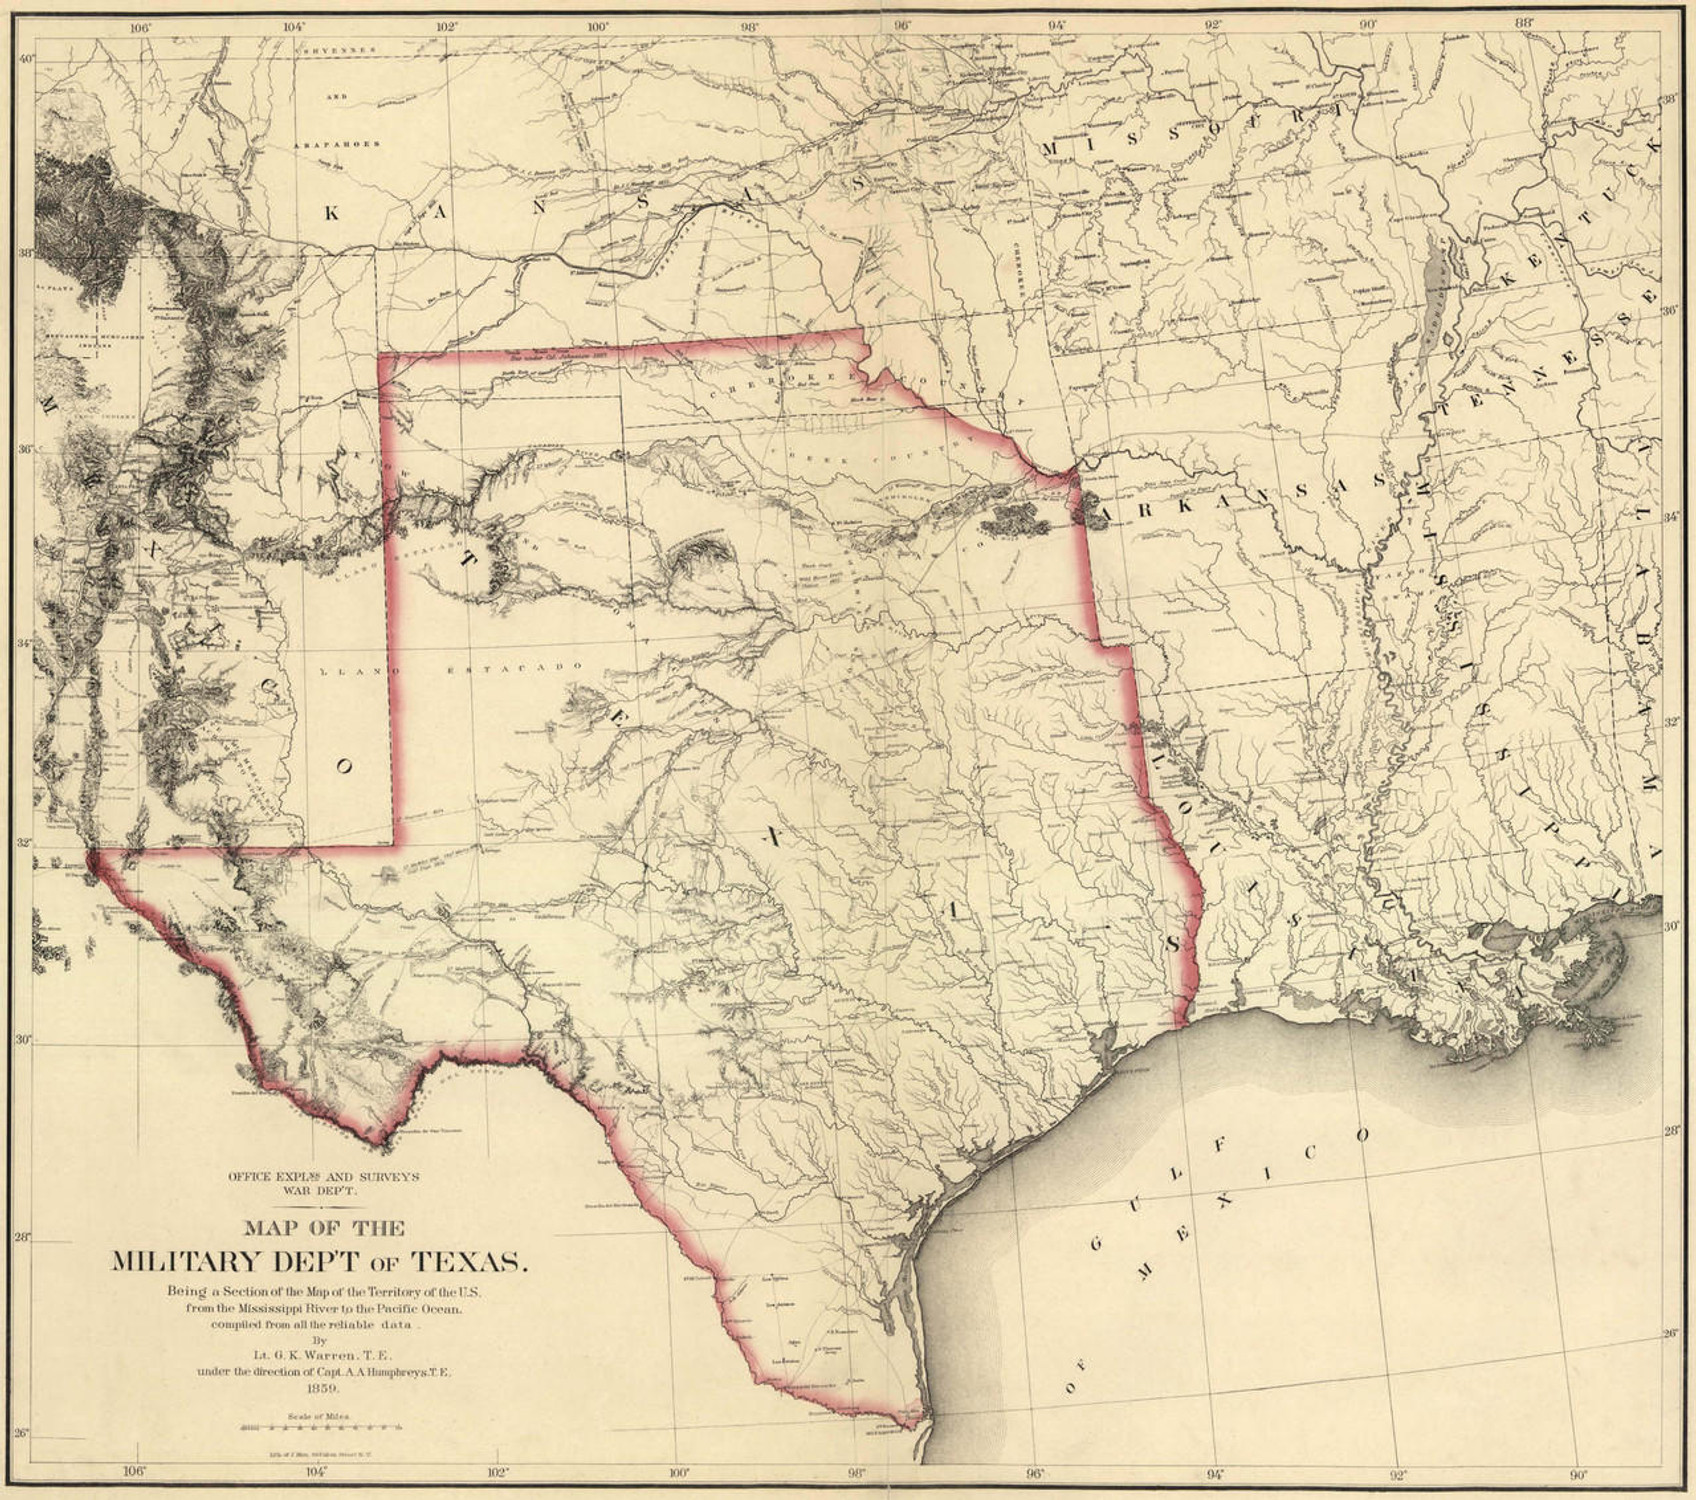 Historic Railroad Map of Texas - 1859, image 1, World Maps Online